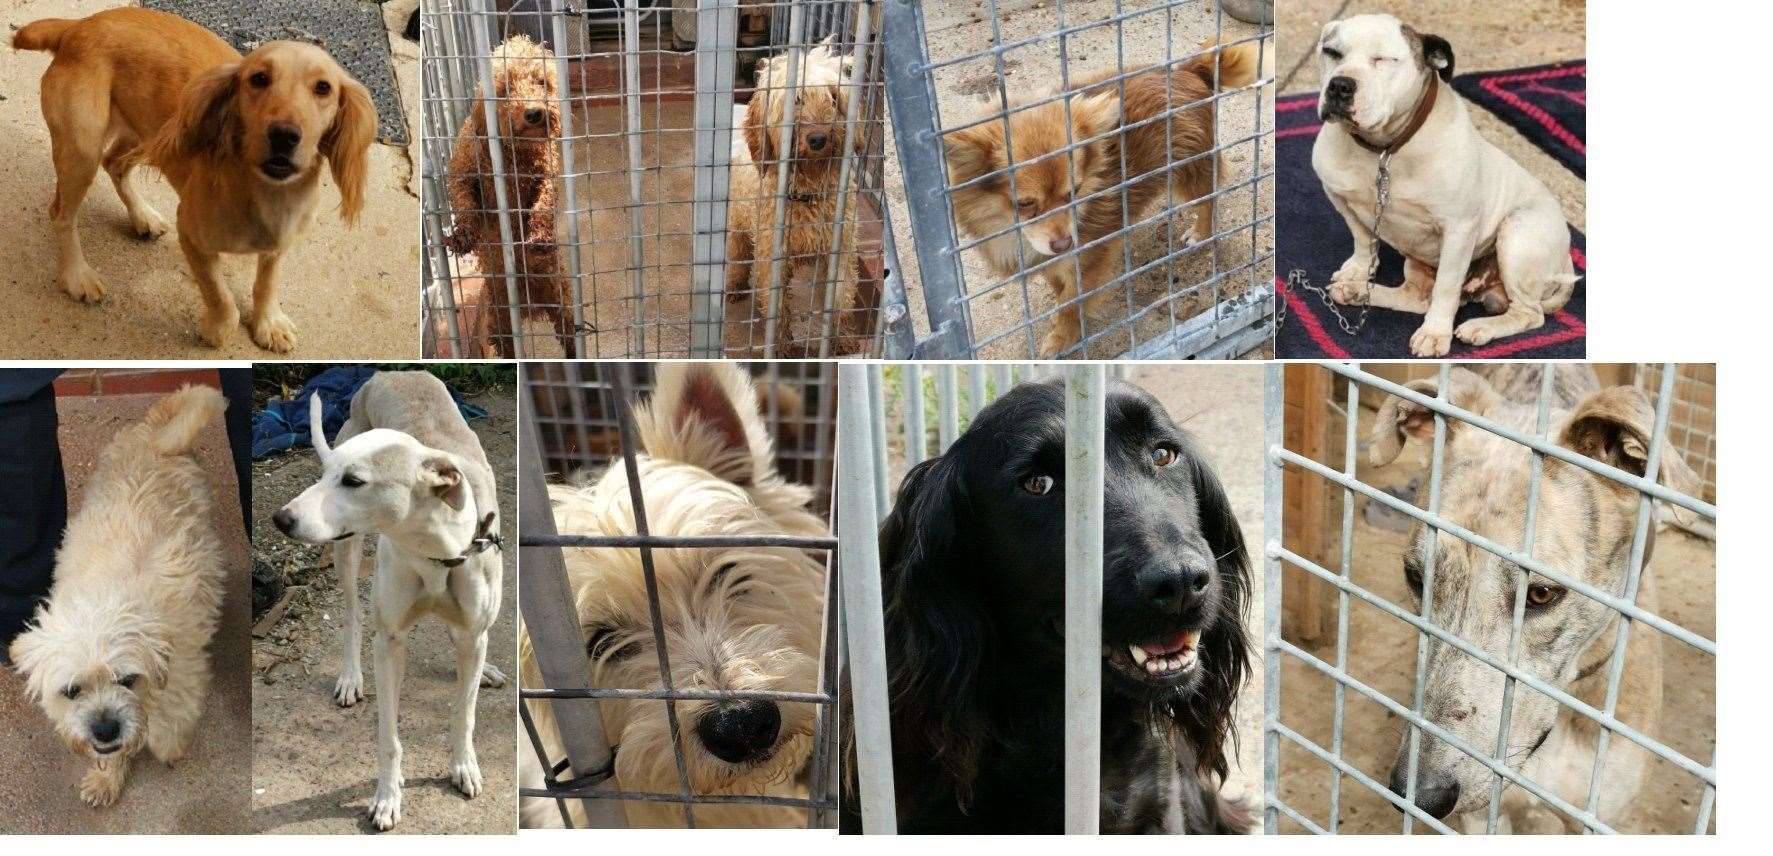 A number of stolen dogs need to be reunited with their owners